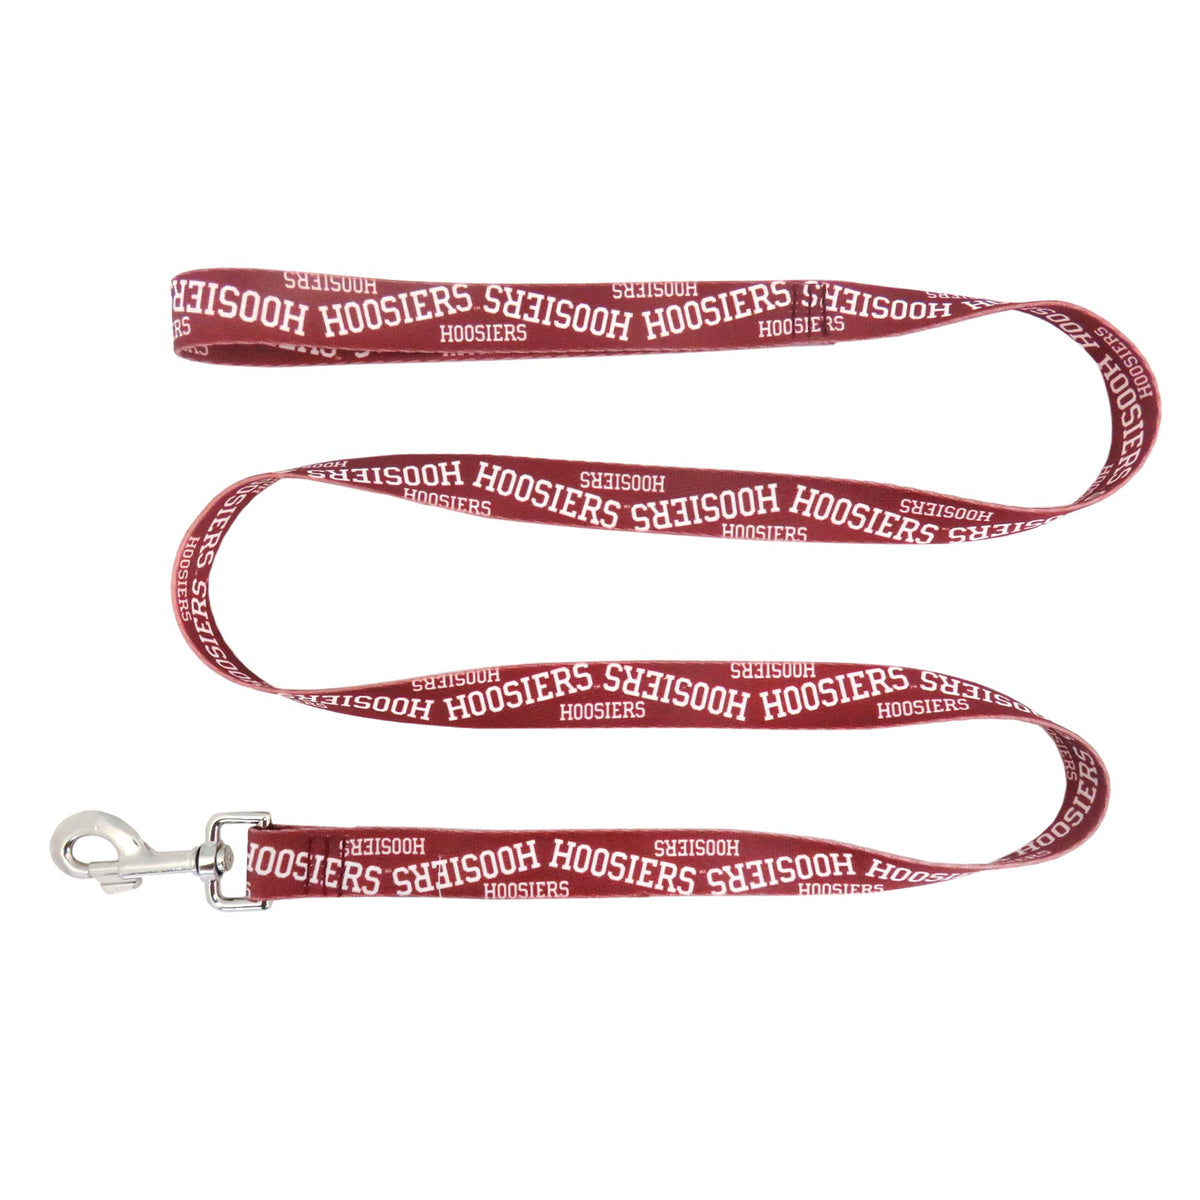 IN Hoosiers Ltd Dog Collar or Leash - 3 Red Rovers